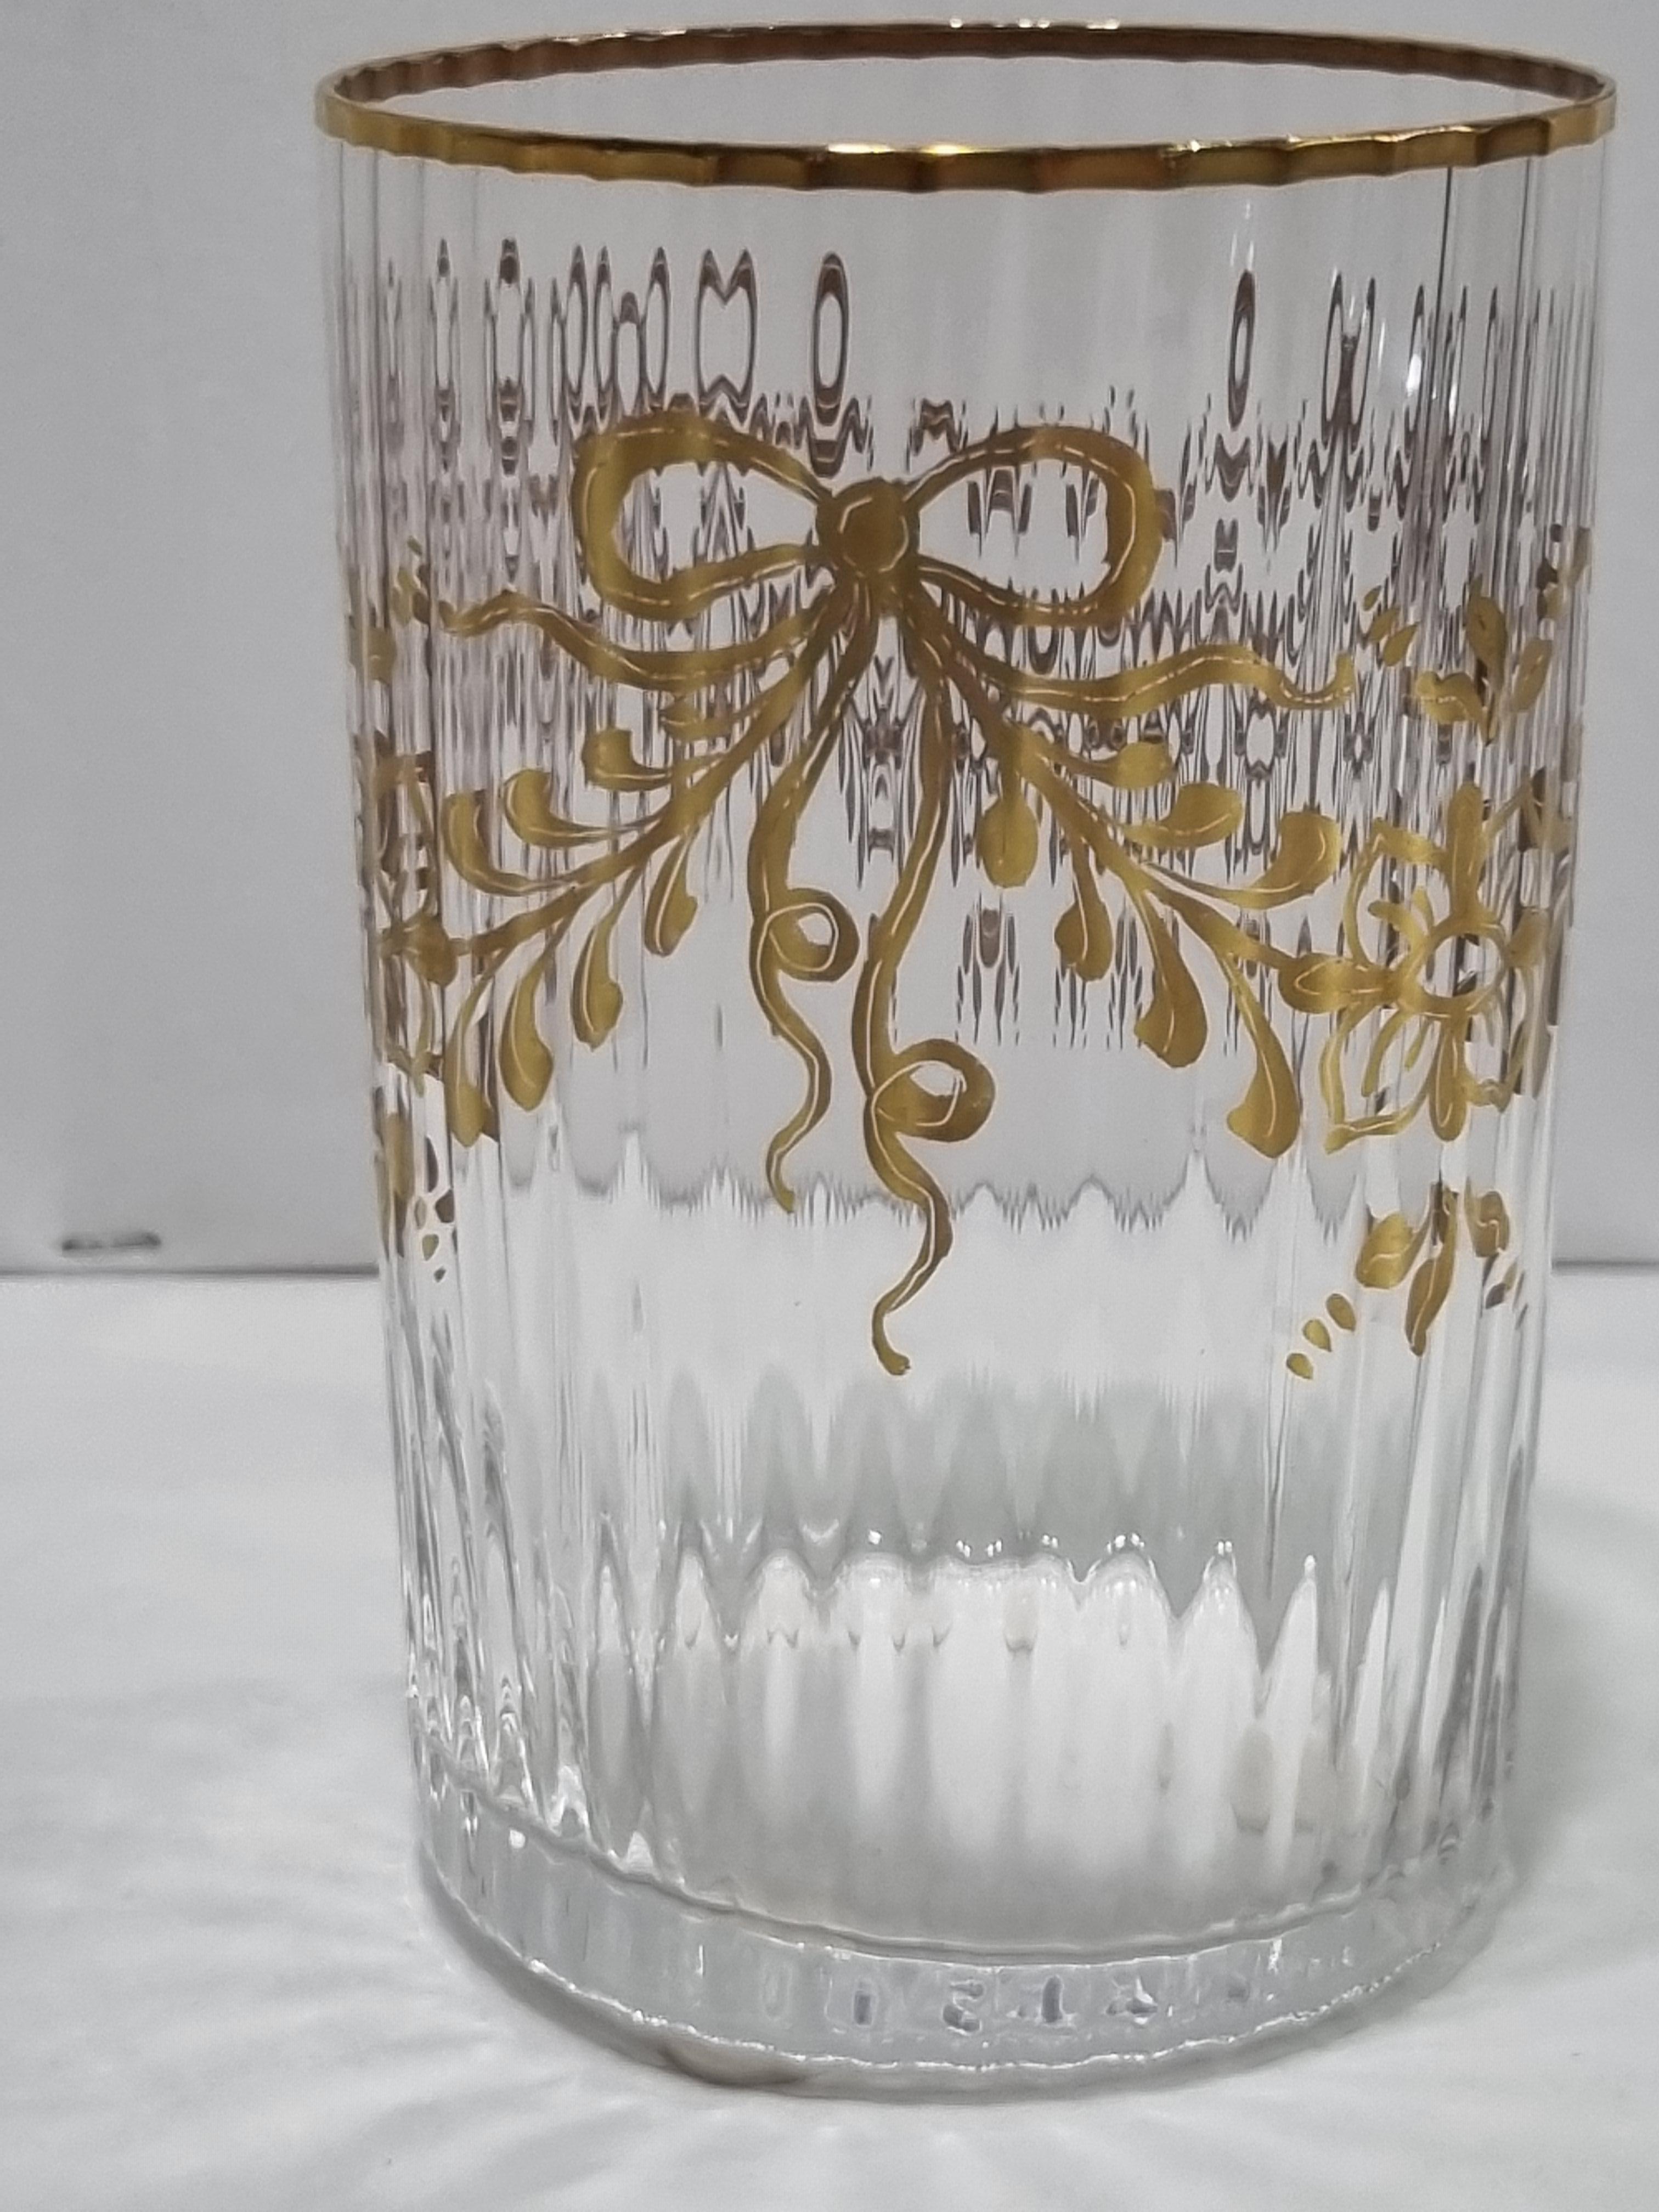 Extremely beautiful set of six tumblers in hand-blown and hand-painted Murano glass with gold motifs of bows and festoons, even the edge of the tumblers is in gold.
NasonMoretti, born in 1923, creates its products in a limited number, adressind